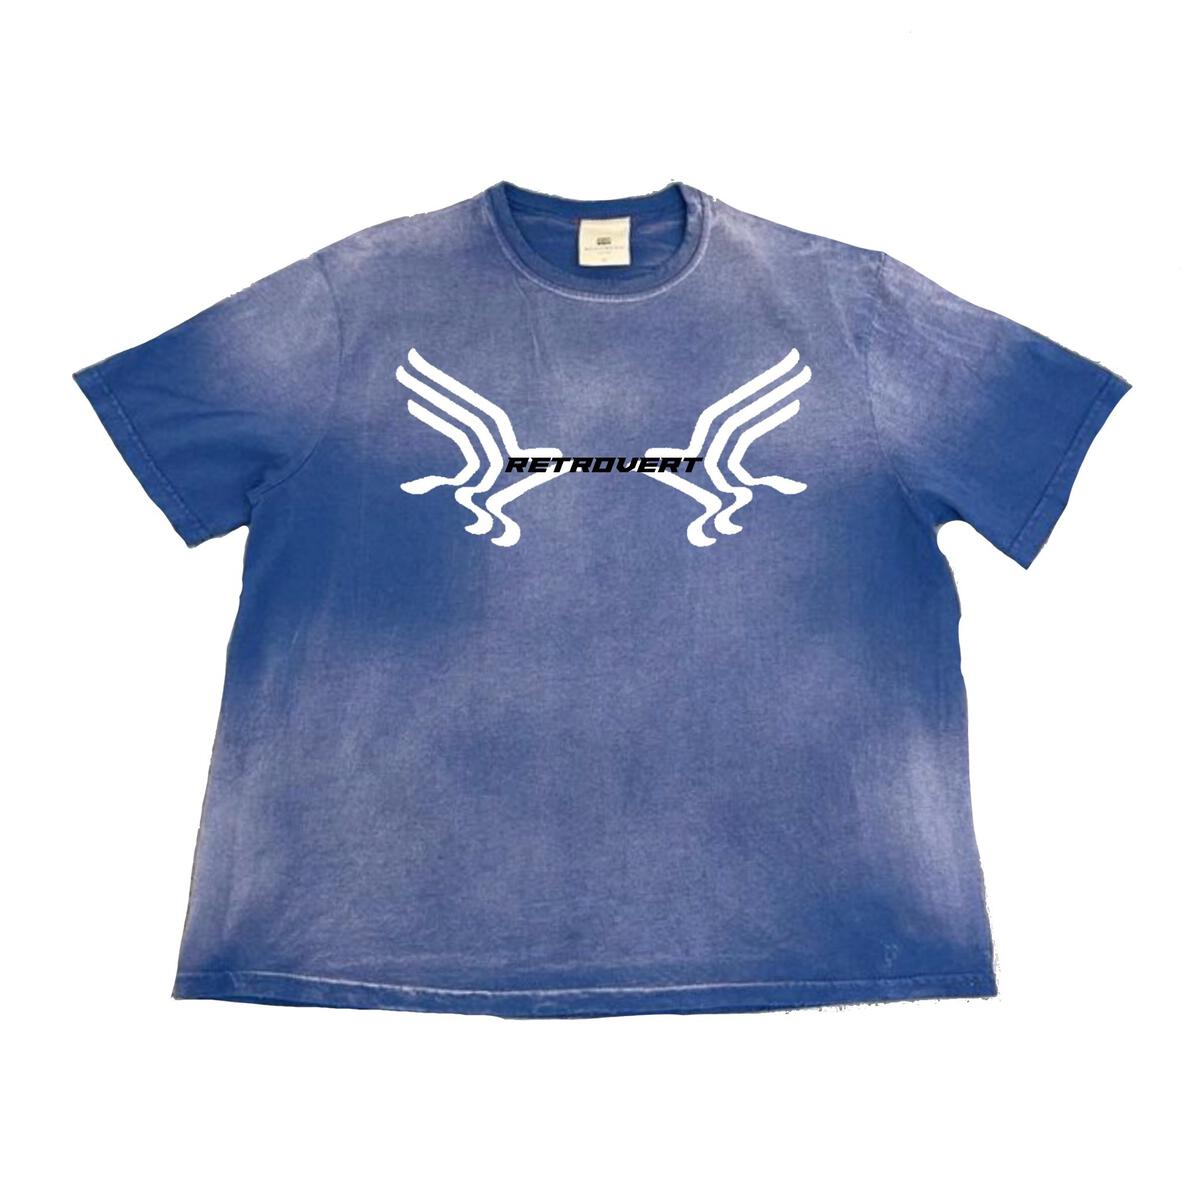 Retrovert Fabric Dyed Wash T-Shirt (Blue)